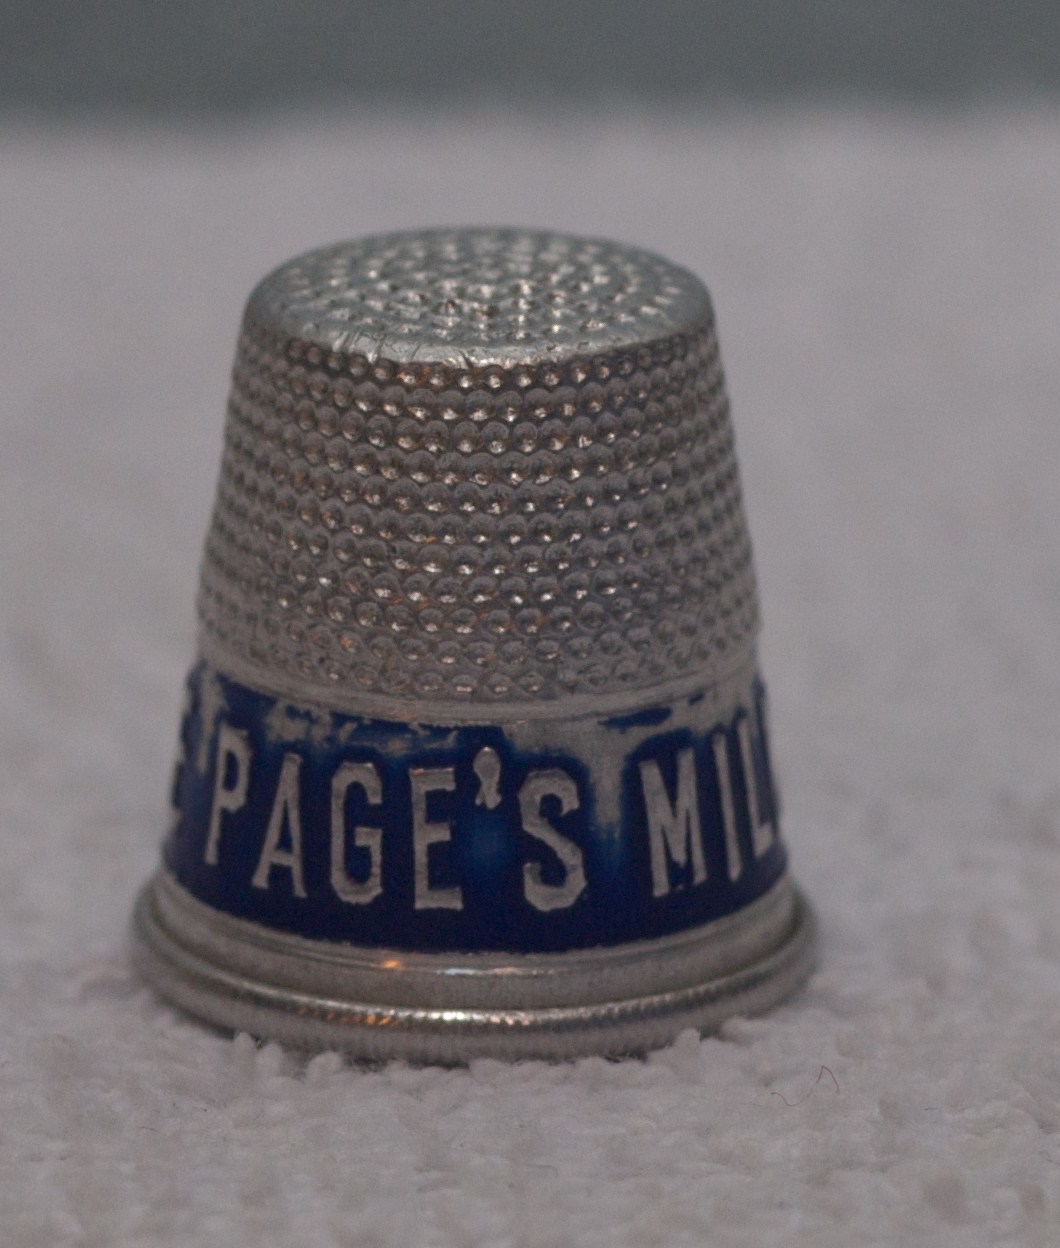 Page\'s Milk Thimble - Drink More Pages Milk (2)